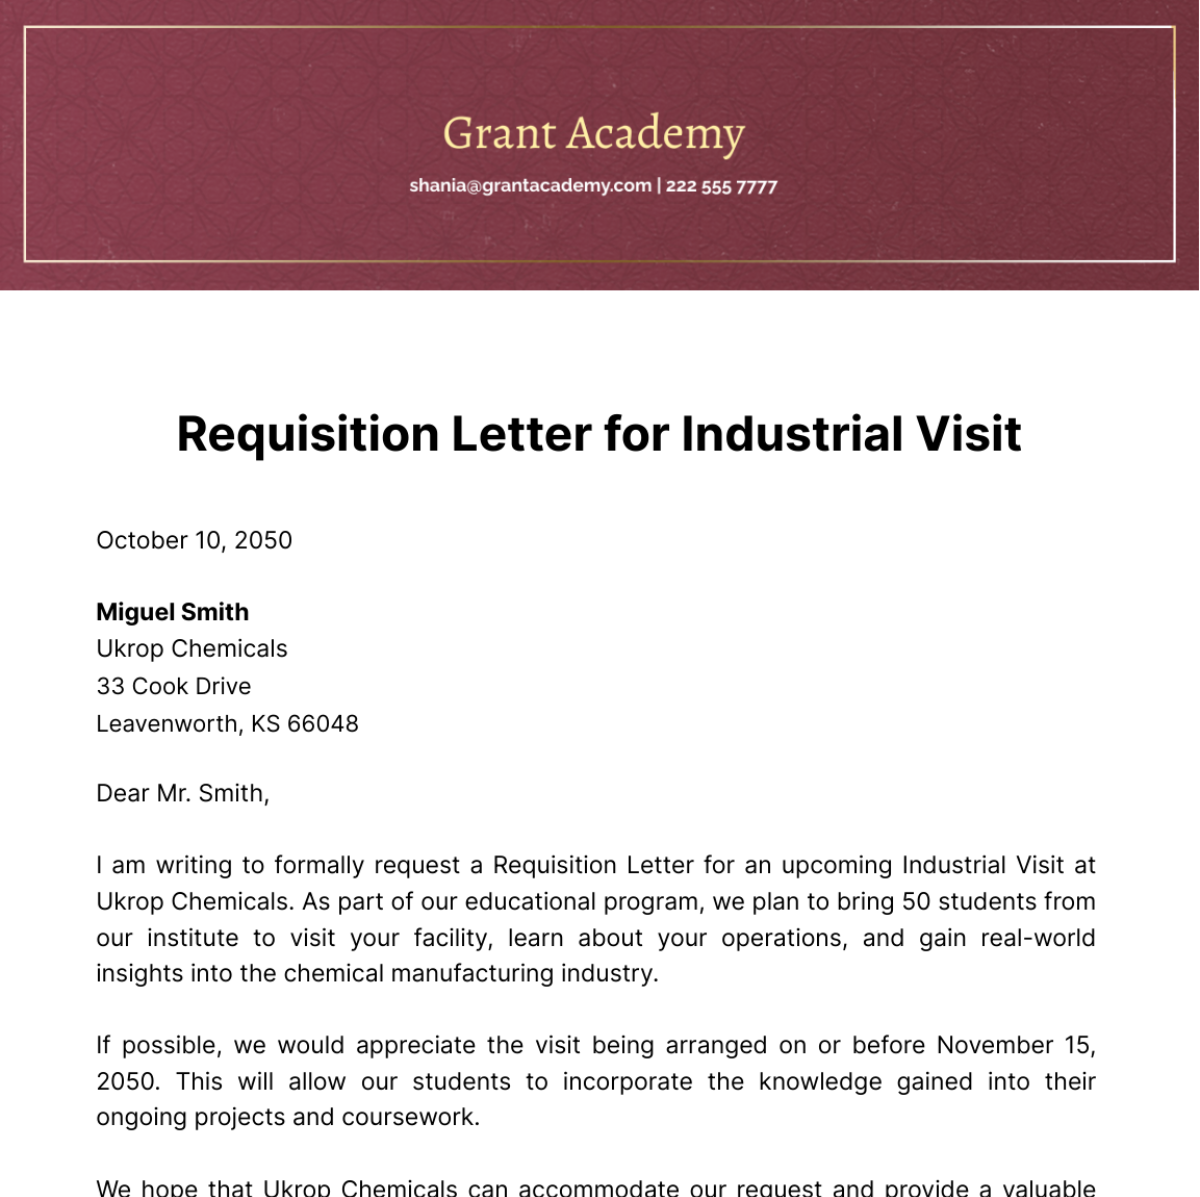 Requisition Letter for Industrial Visit Template